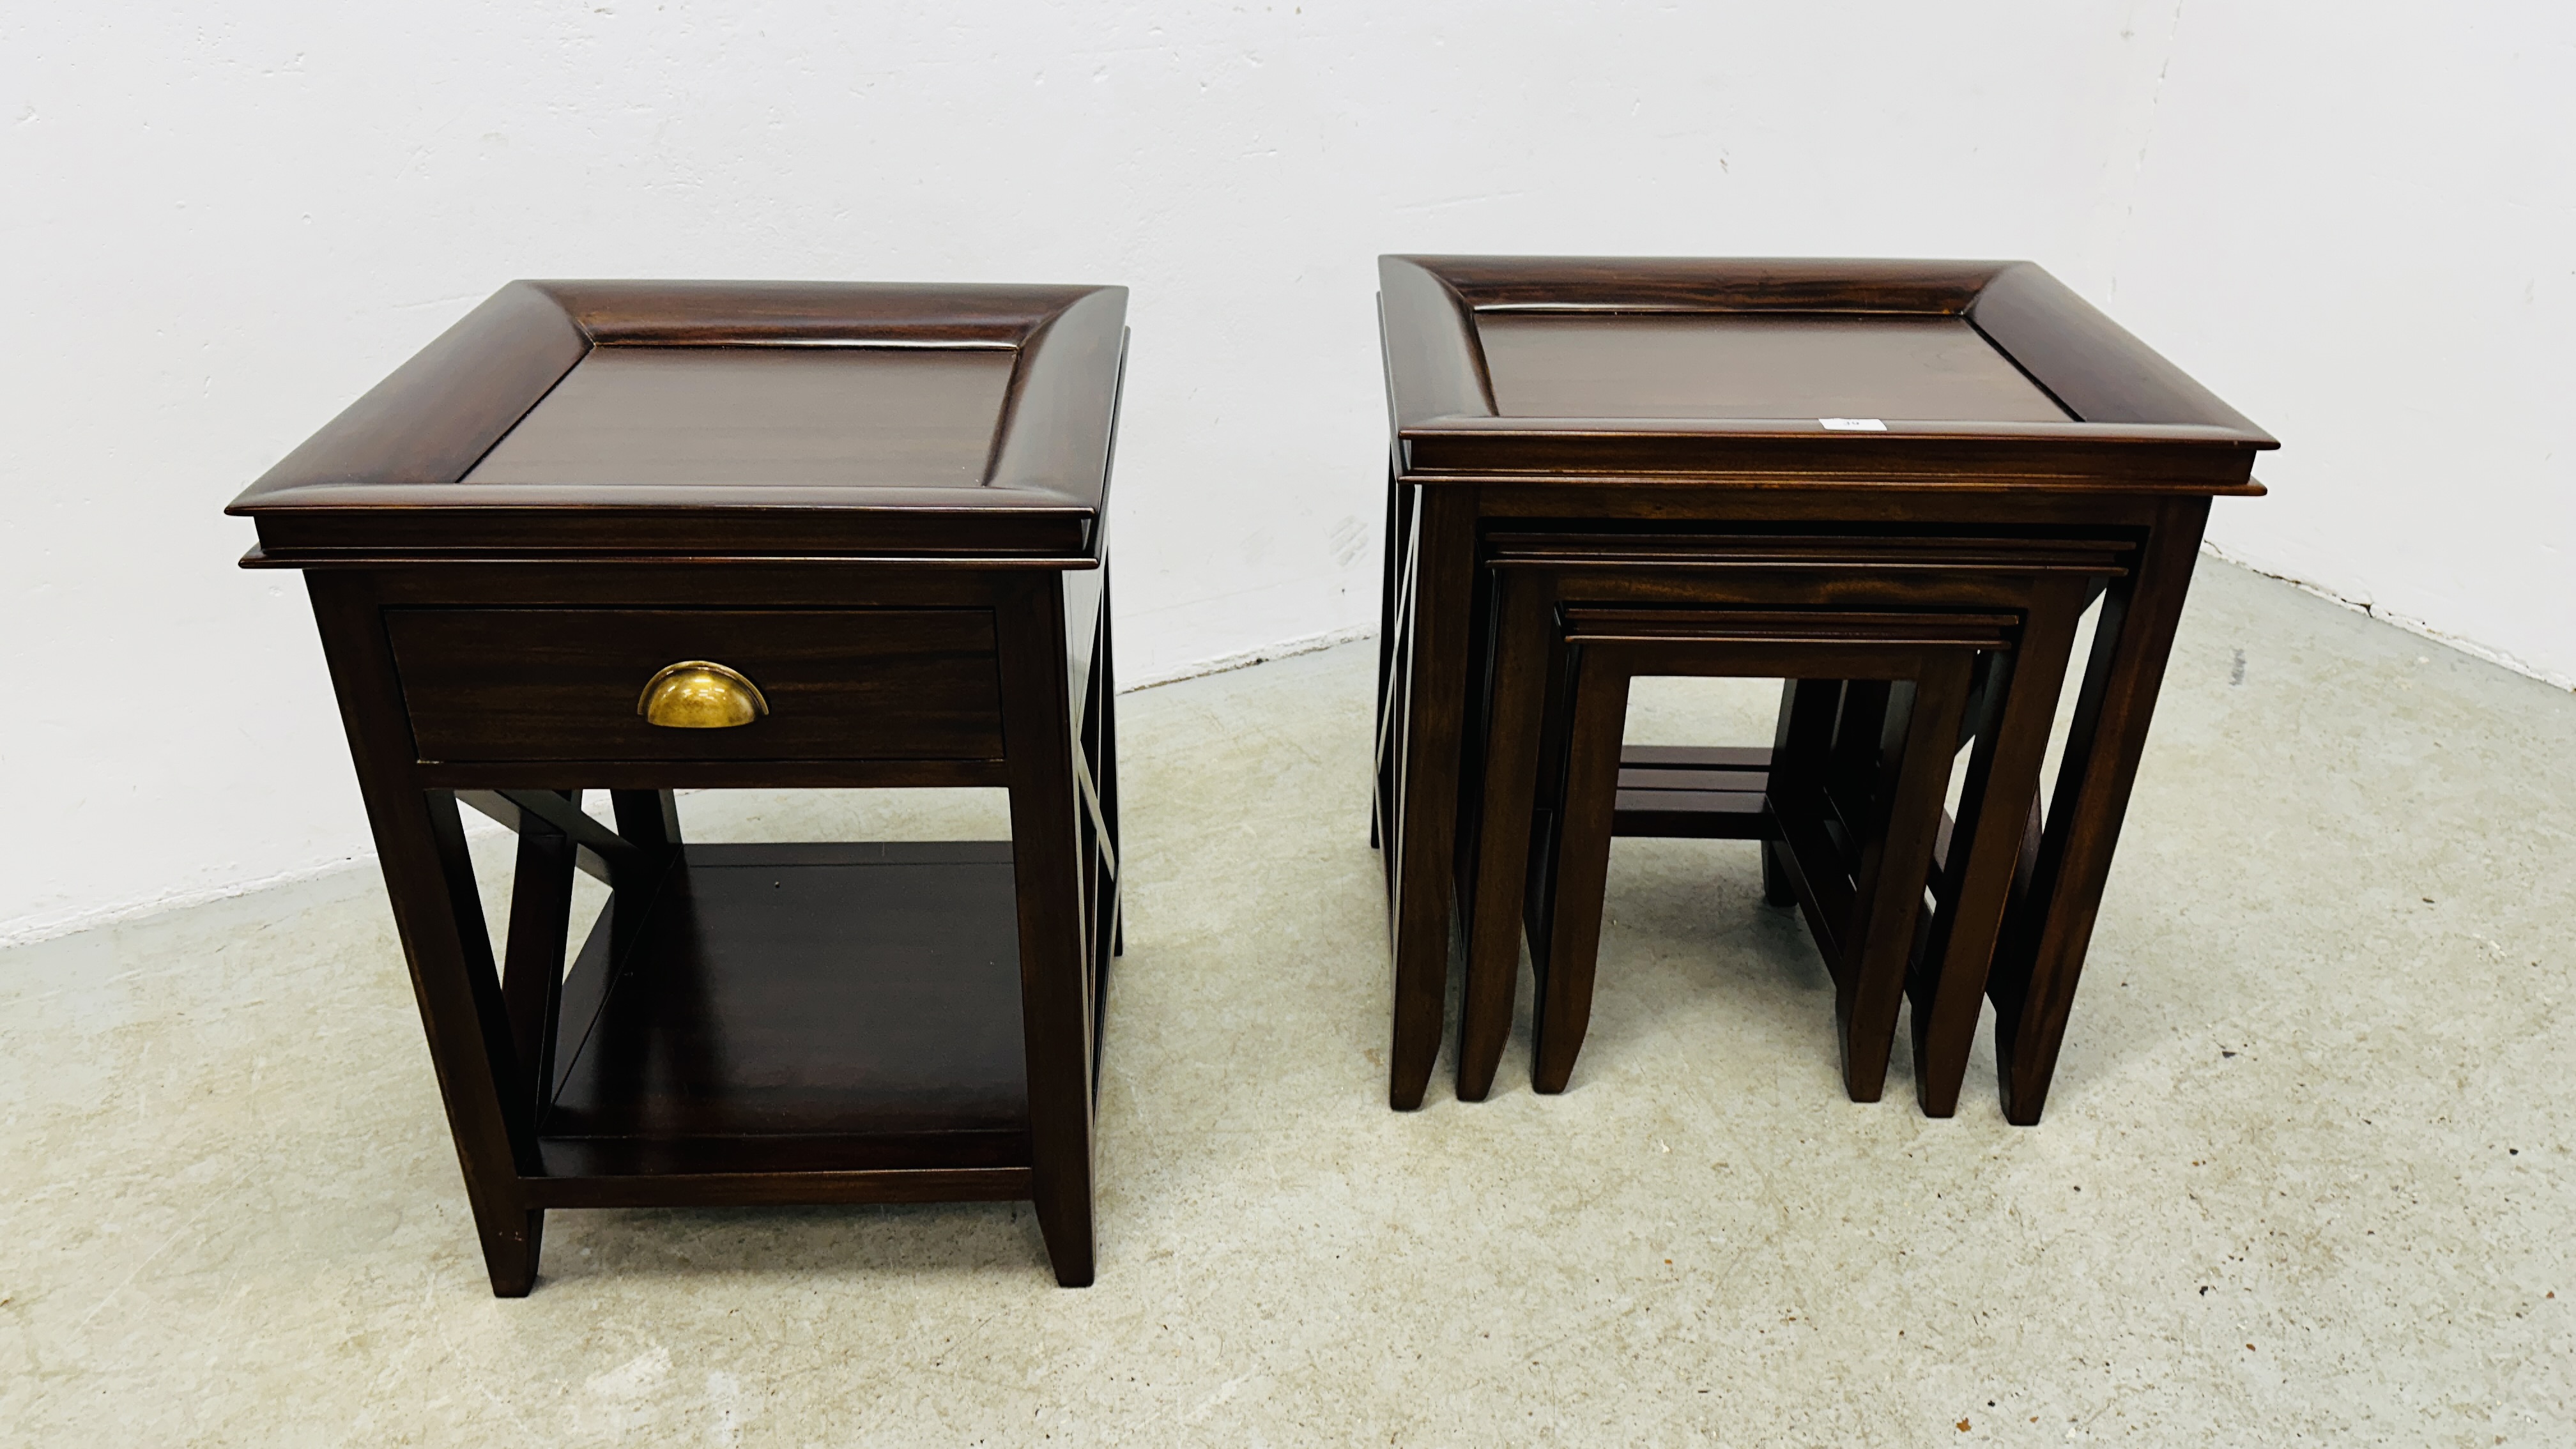 A NEST OF 3 HARDWOOD OCCASIONAL TABLES ALONG WITH A MATCHING SINGLE DRAWER LAMP TABLE W 46 X 46 X